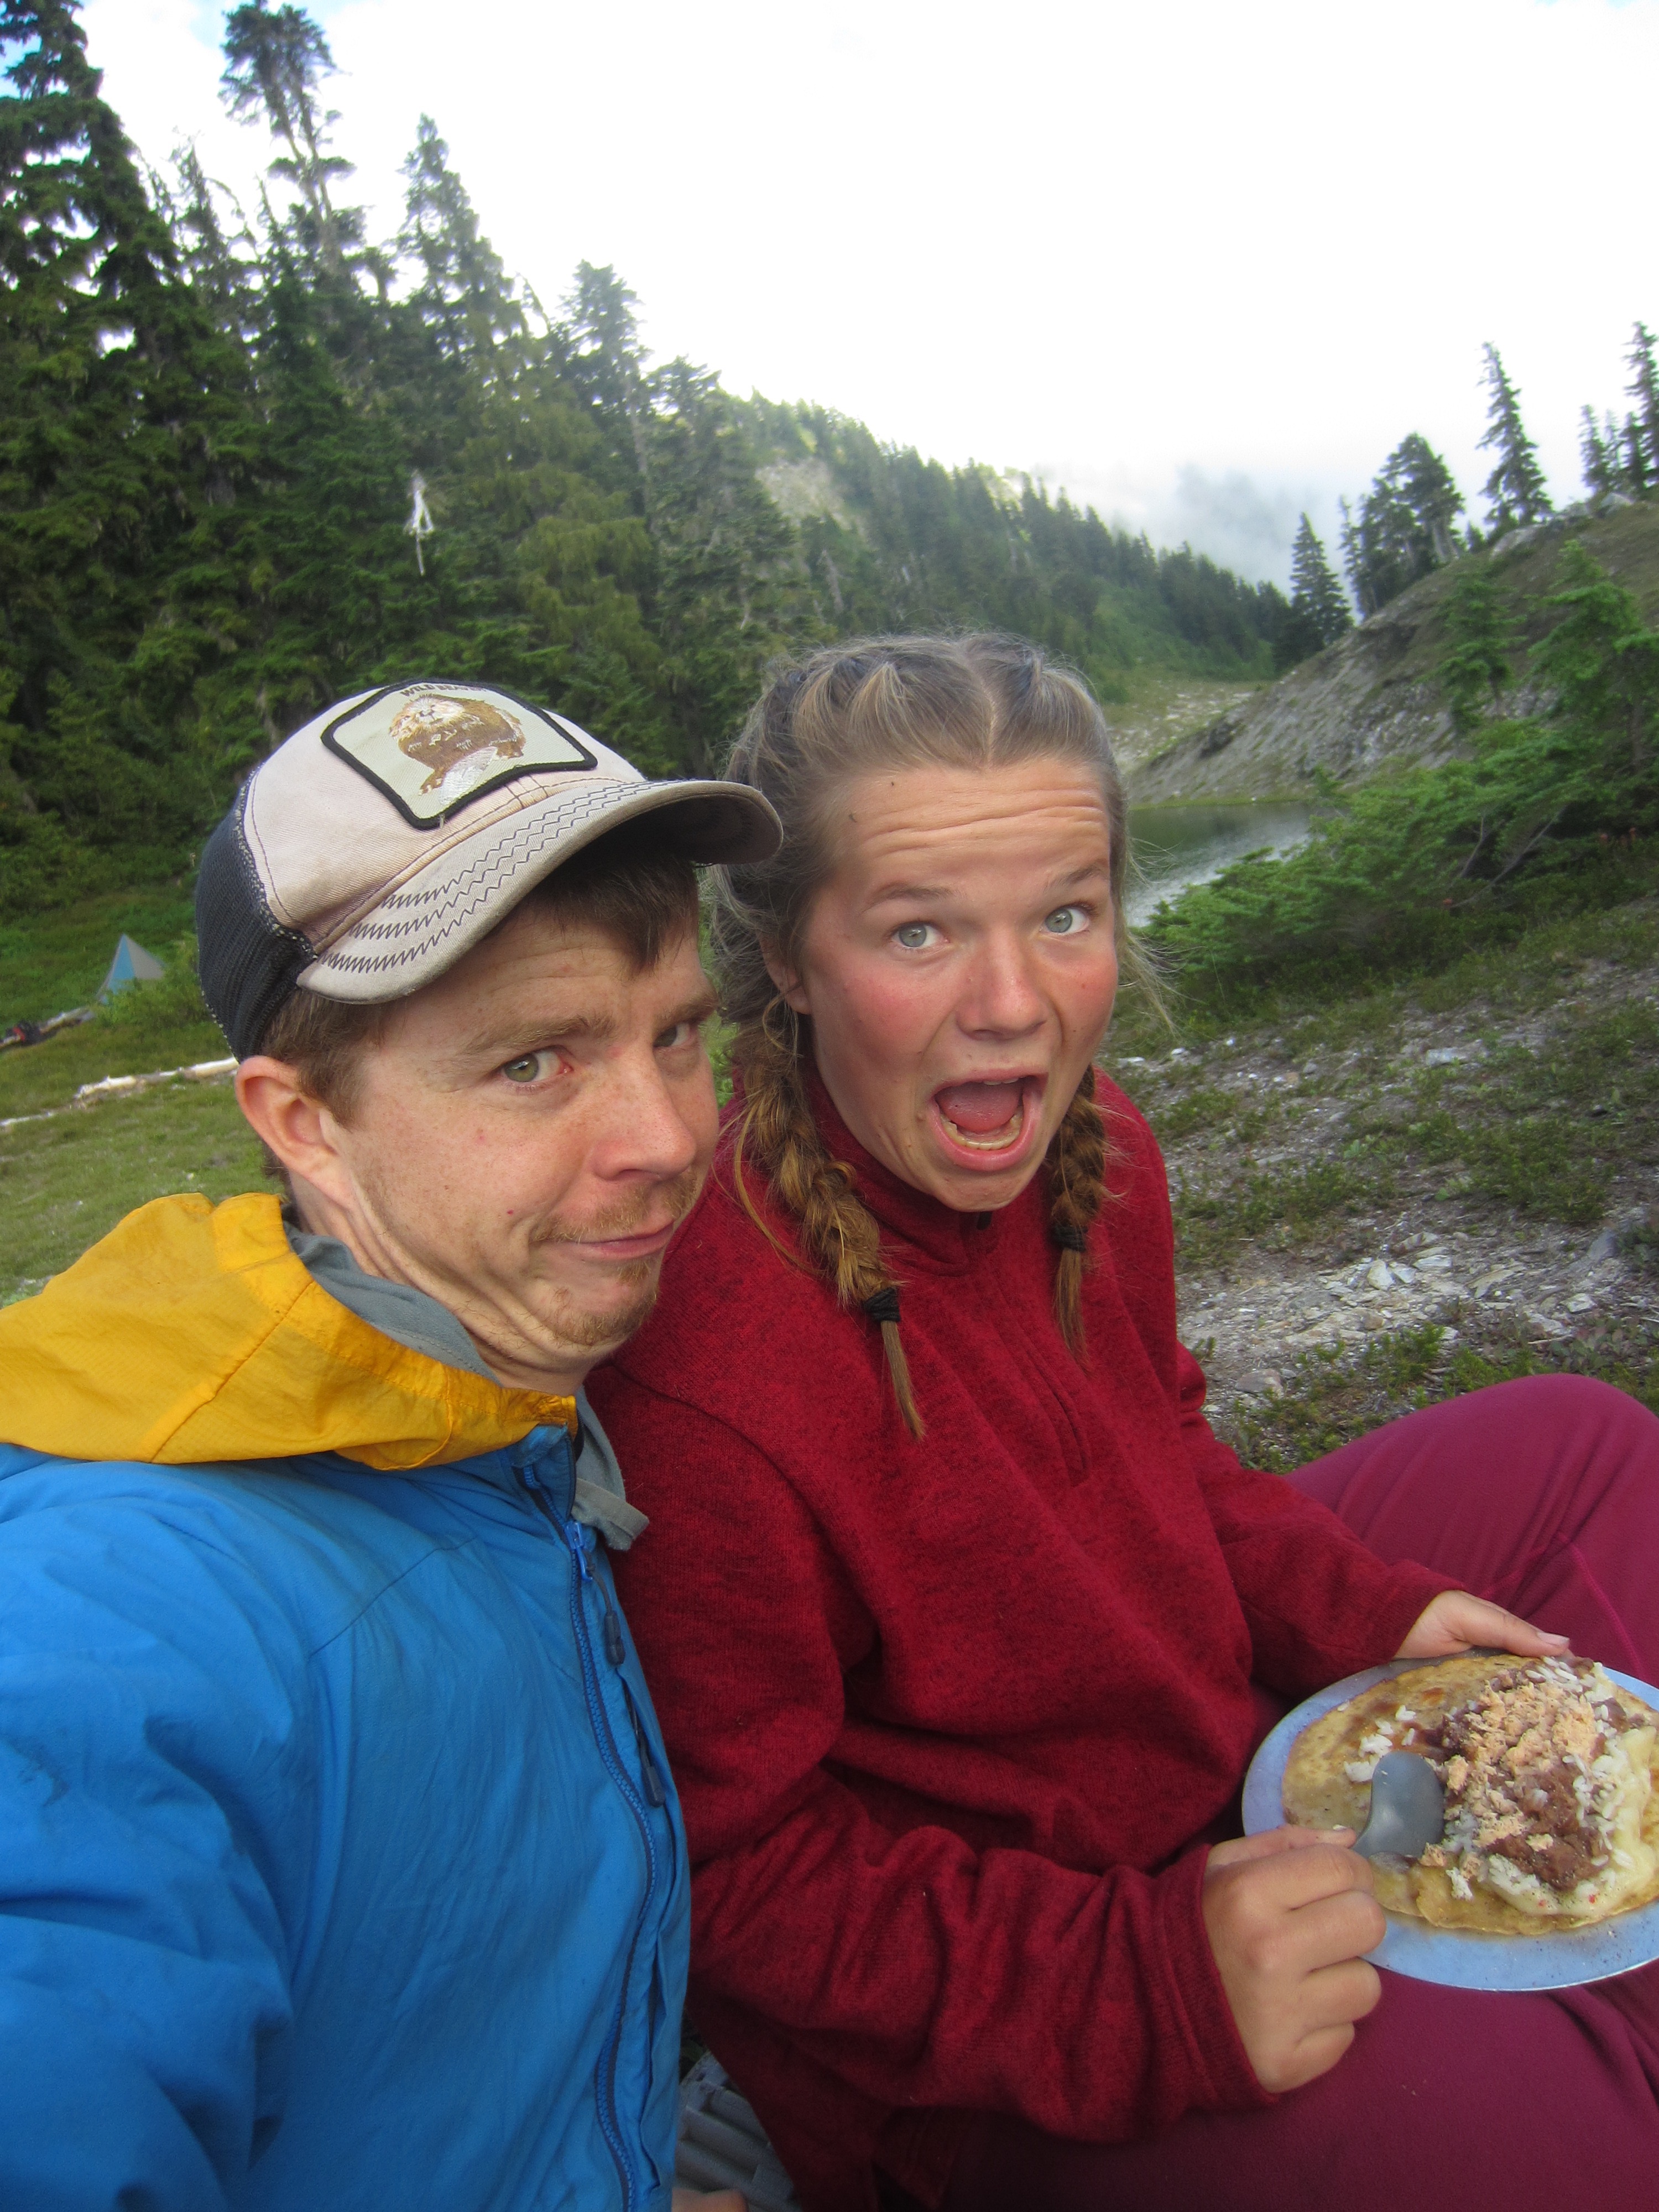 NOLS student and instructor make goofy faces for the camera while eating backcoutry burritos